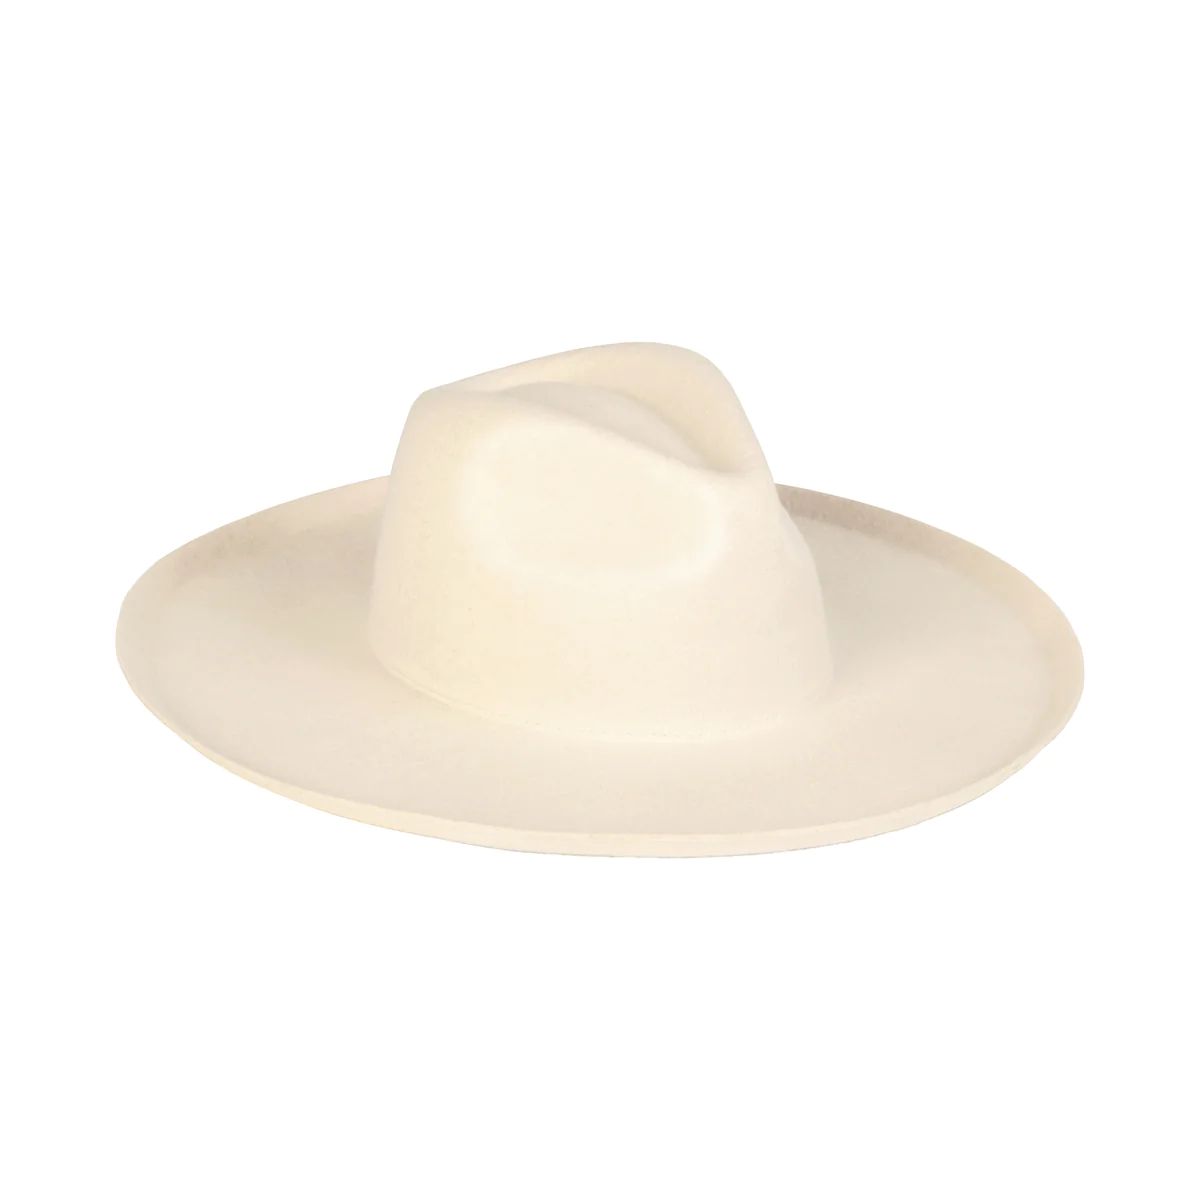 The Melodic Fedora - Wool Felt Fedora Hat in White | Lack of Color US | Lack of Color